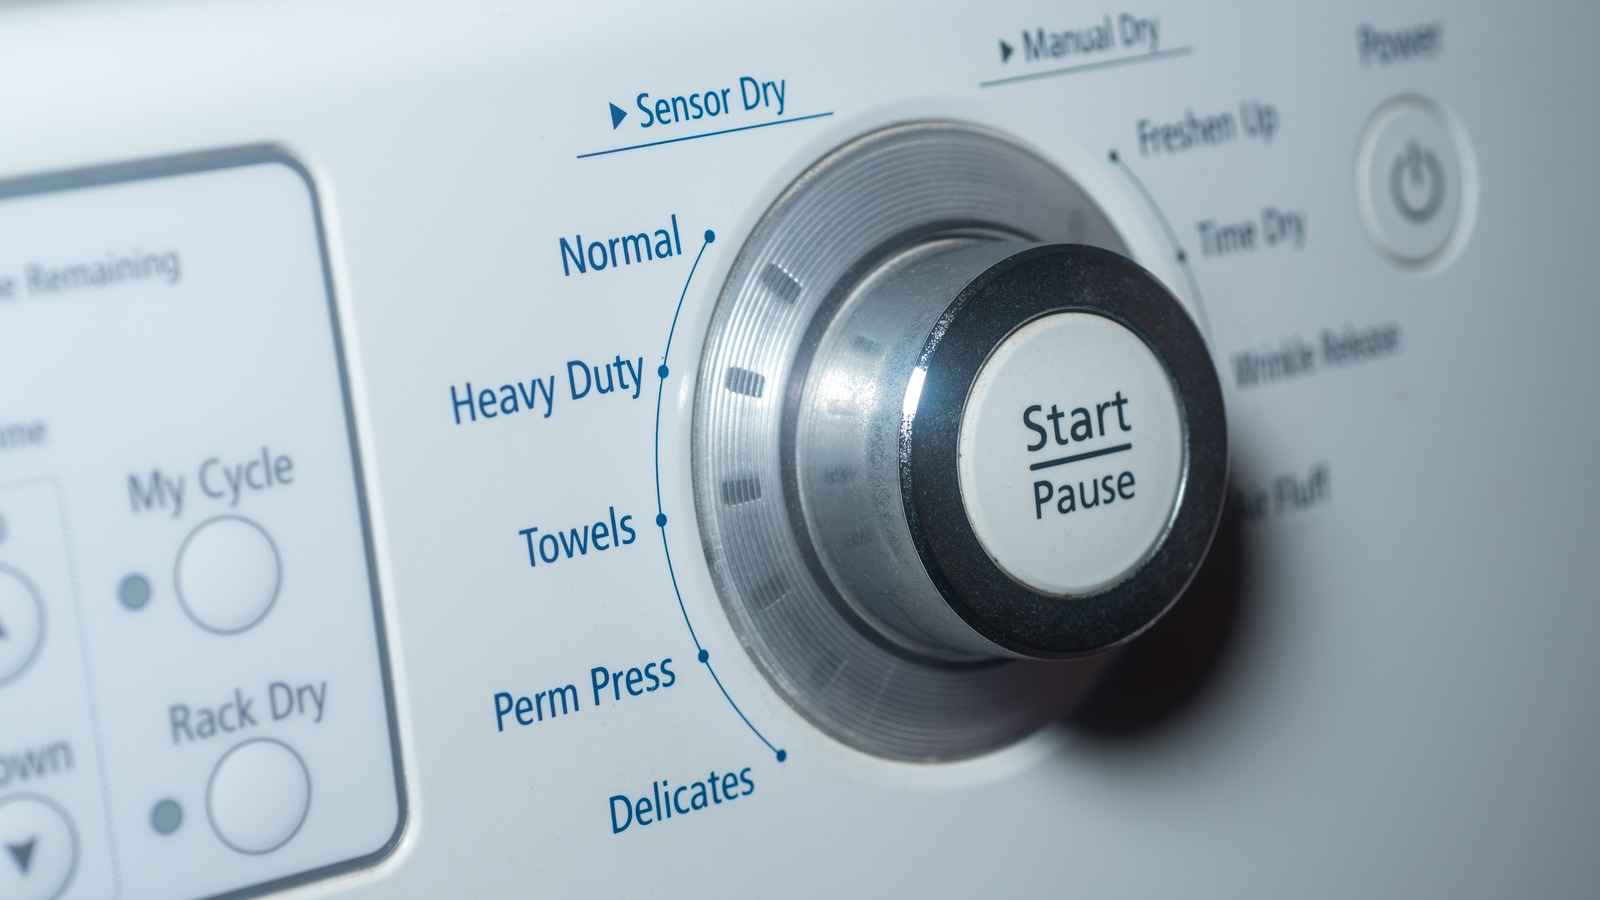 When to Use Permanent Press (Plus Those Other Washer Cycle Settings)